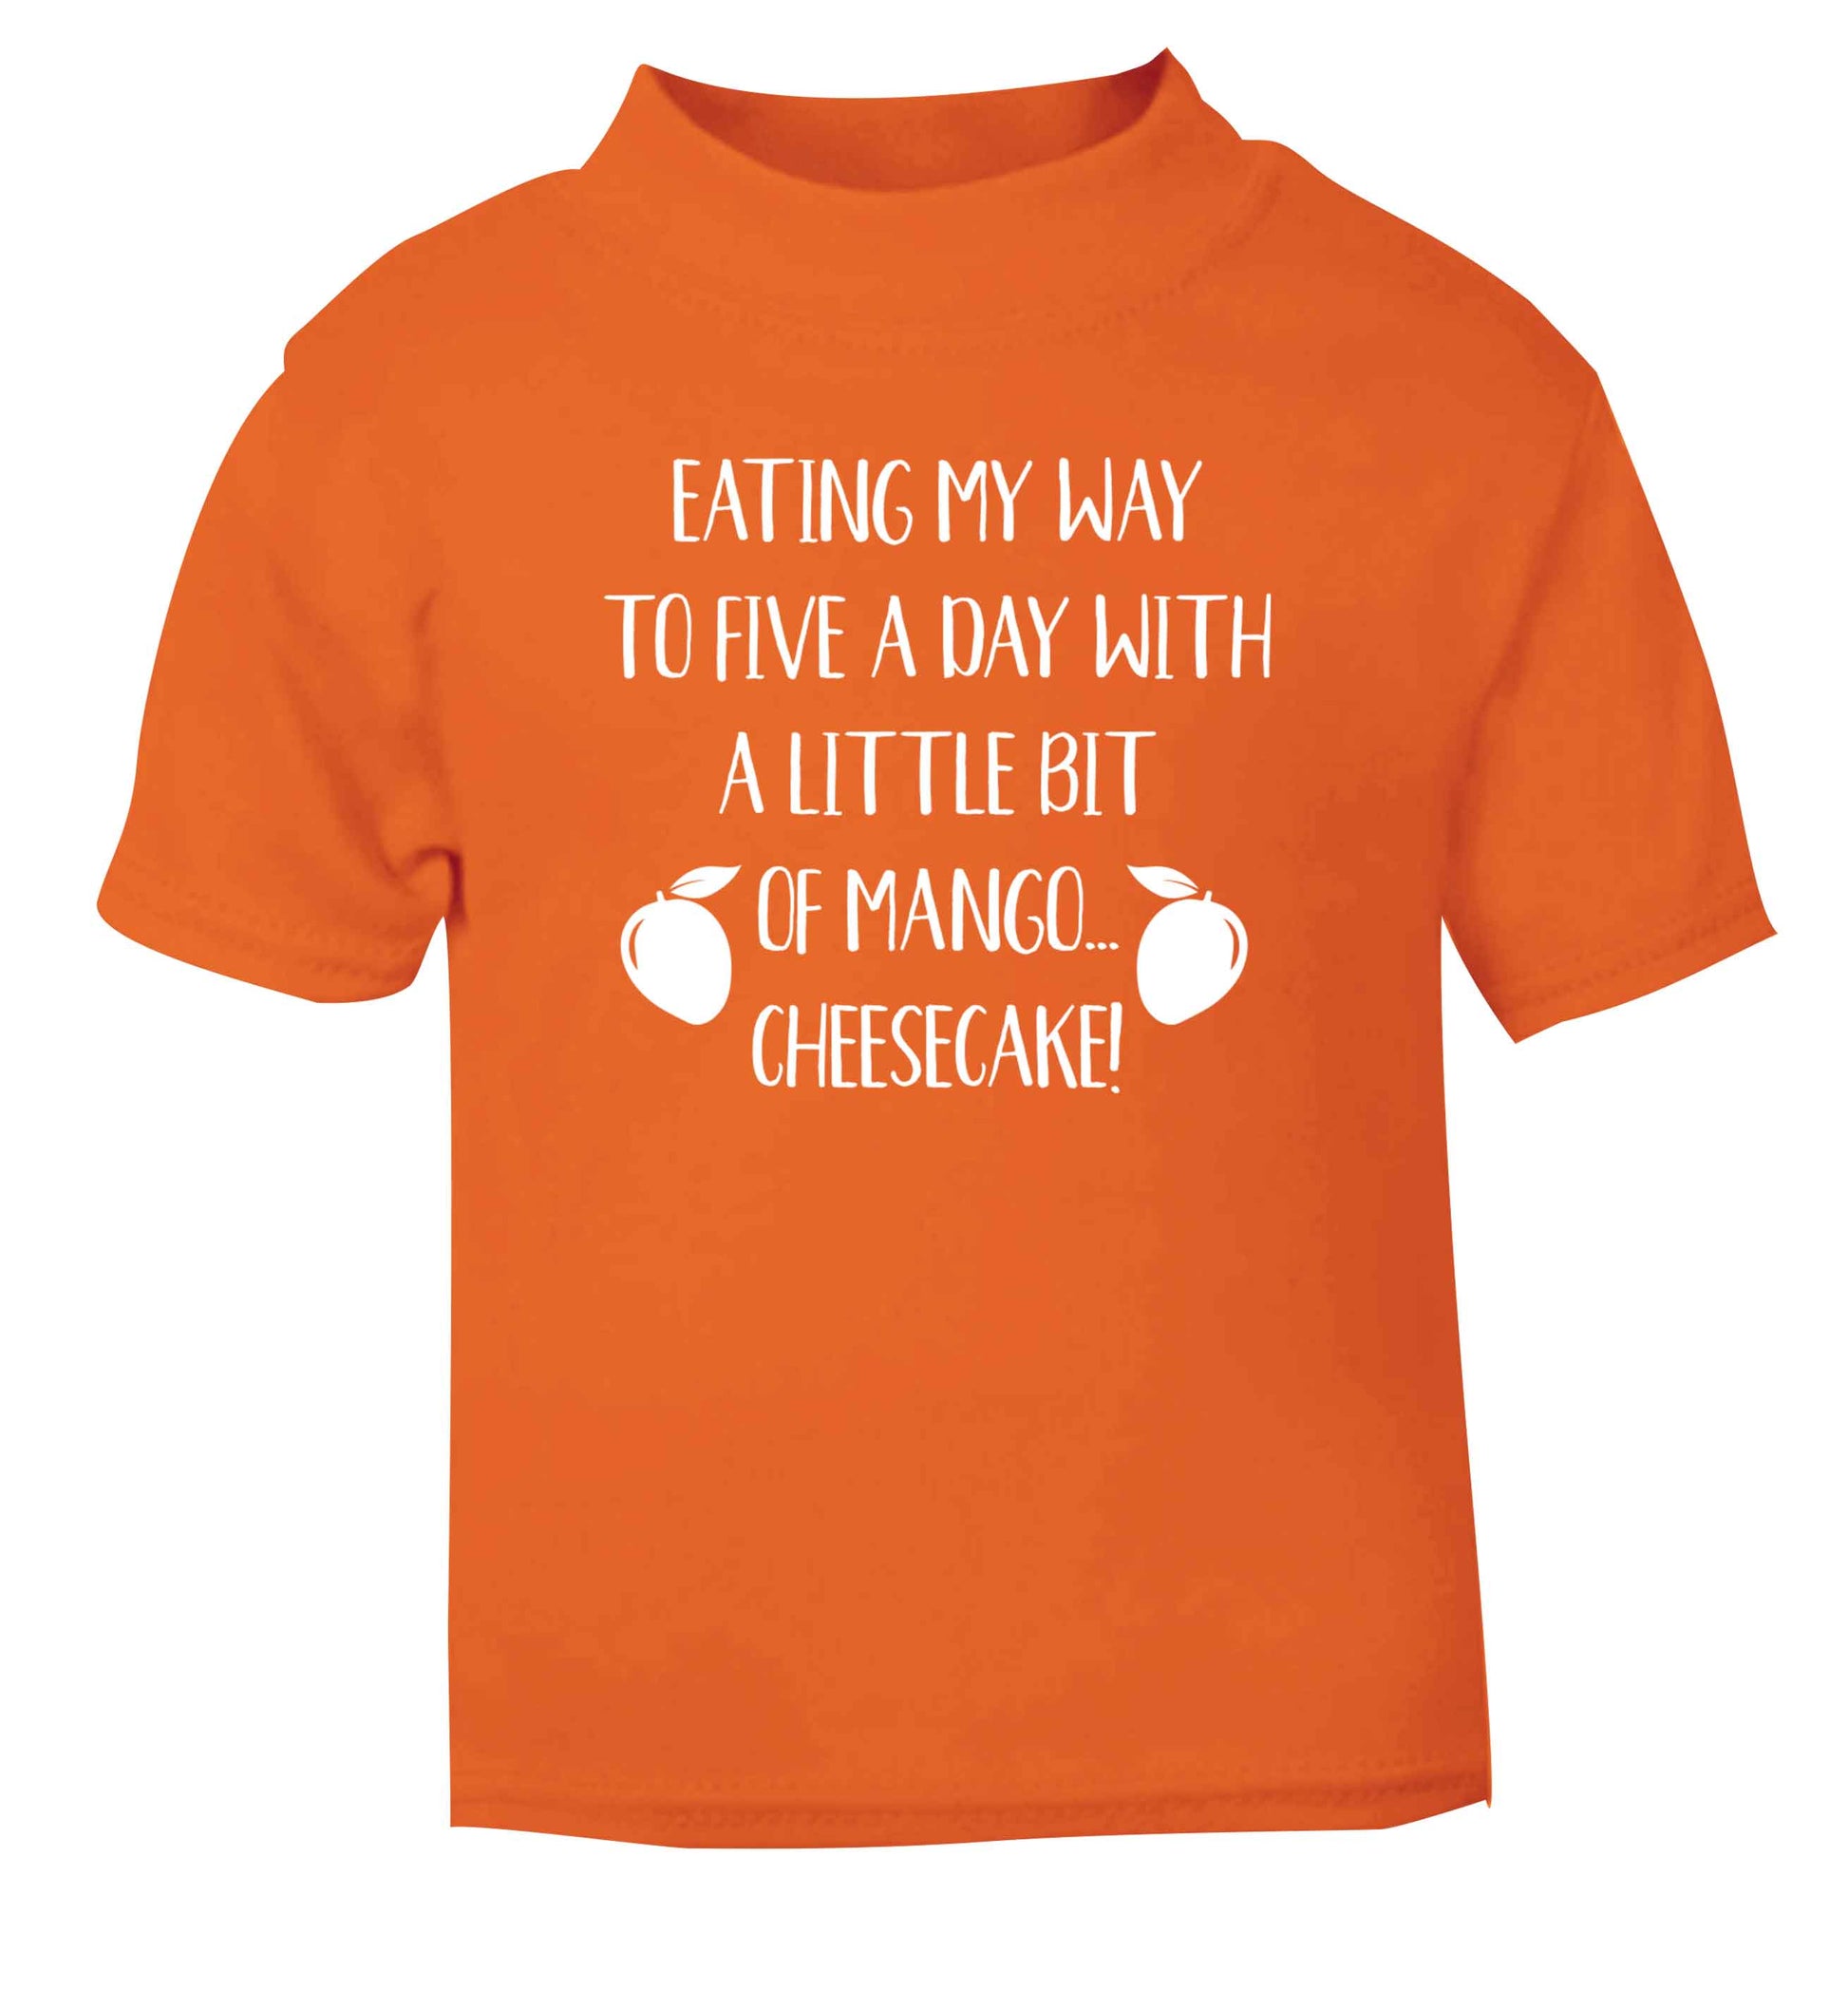 Eating my way to five a day with a little bit of mango cheesecake orange Baby Toddler Tshirt 2 Years